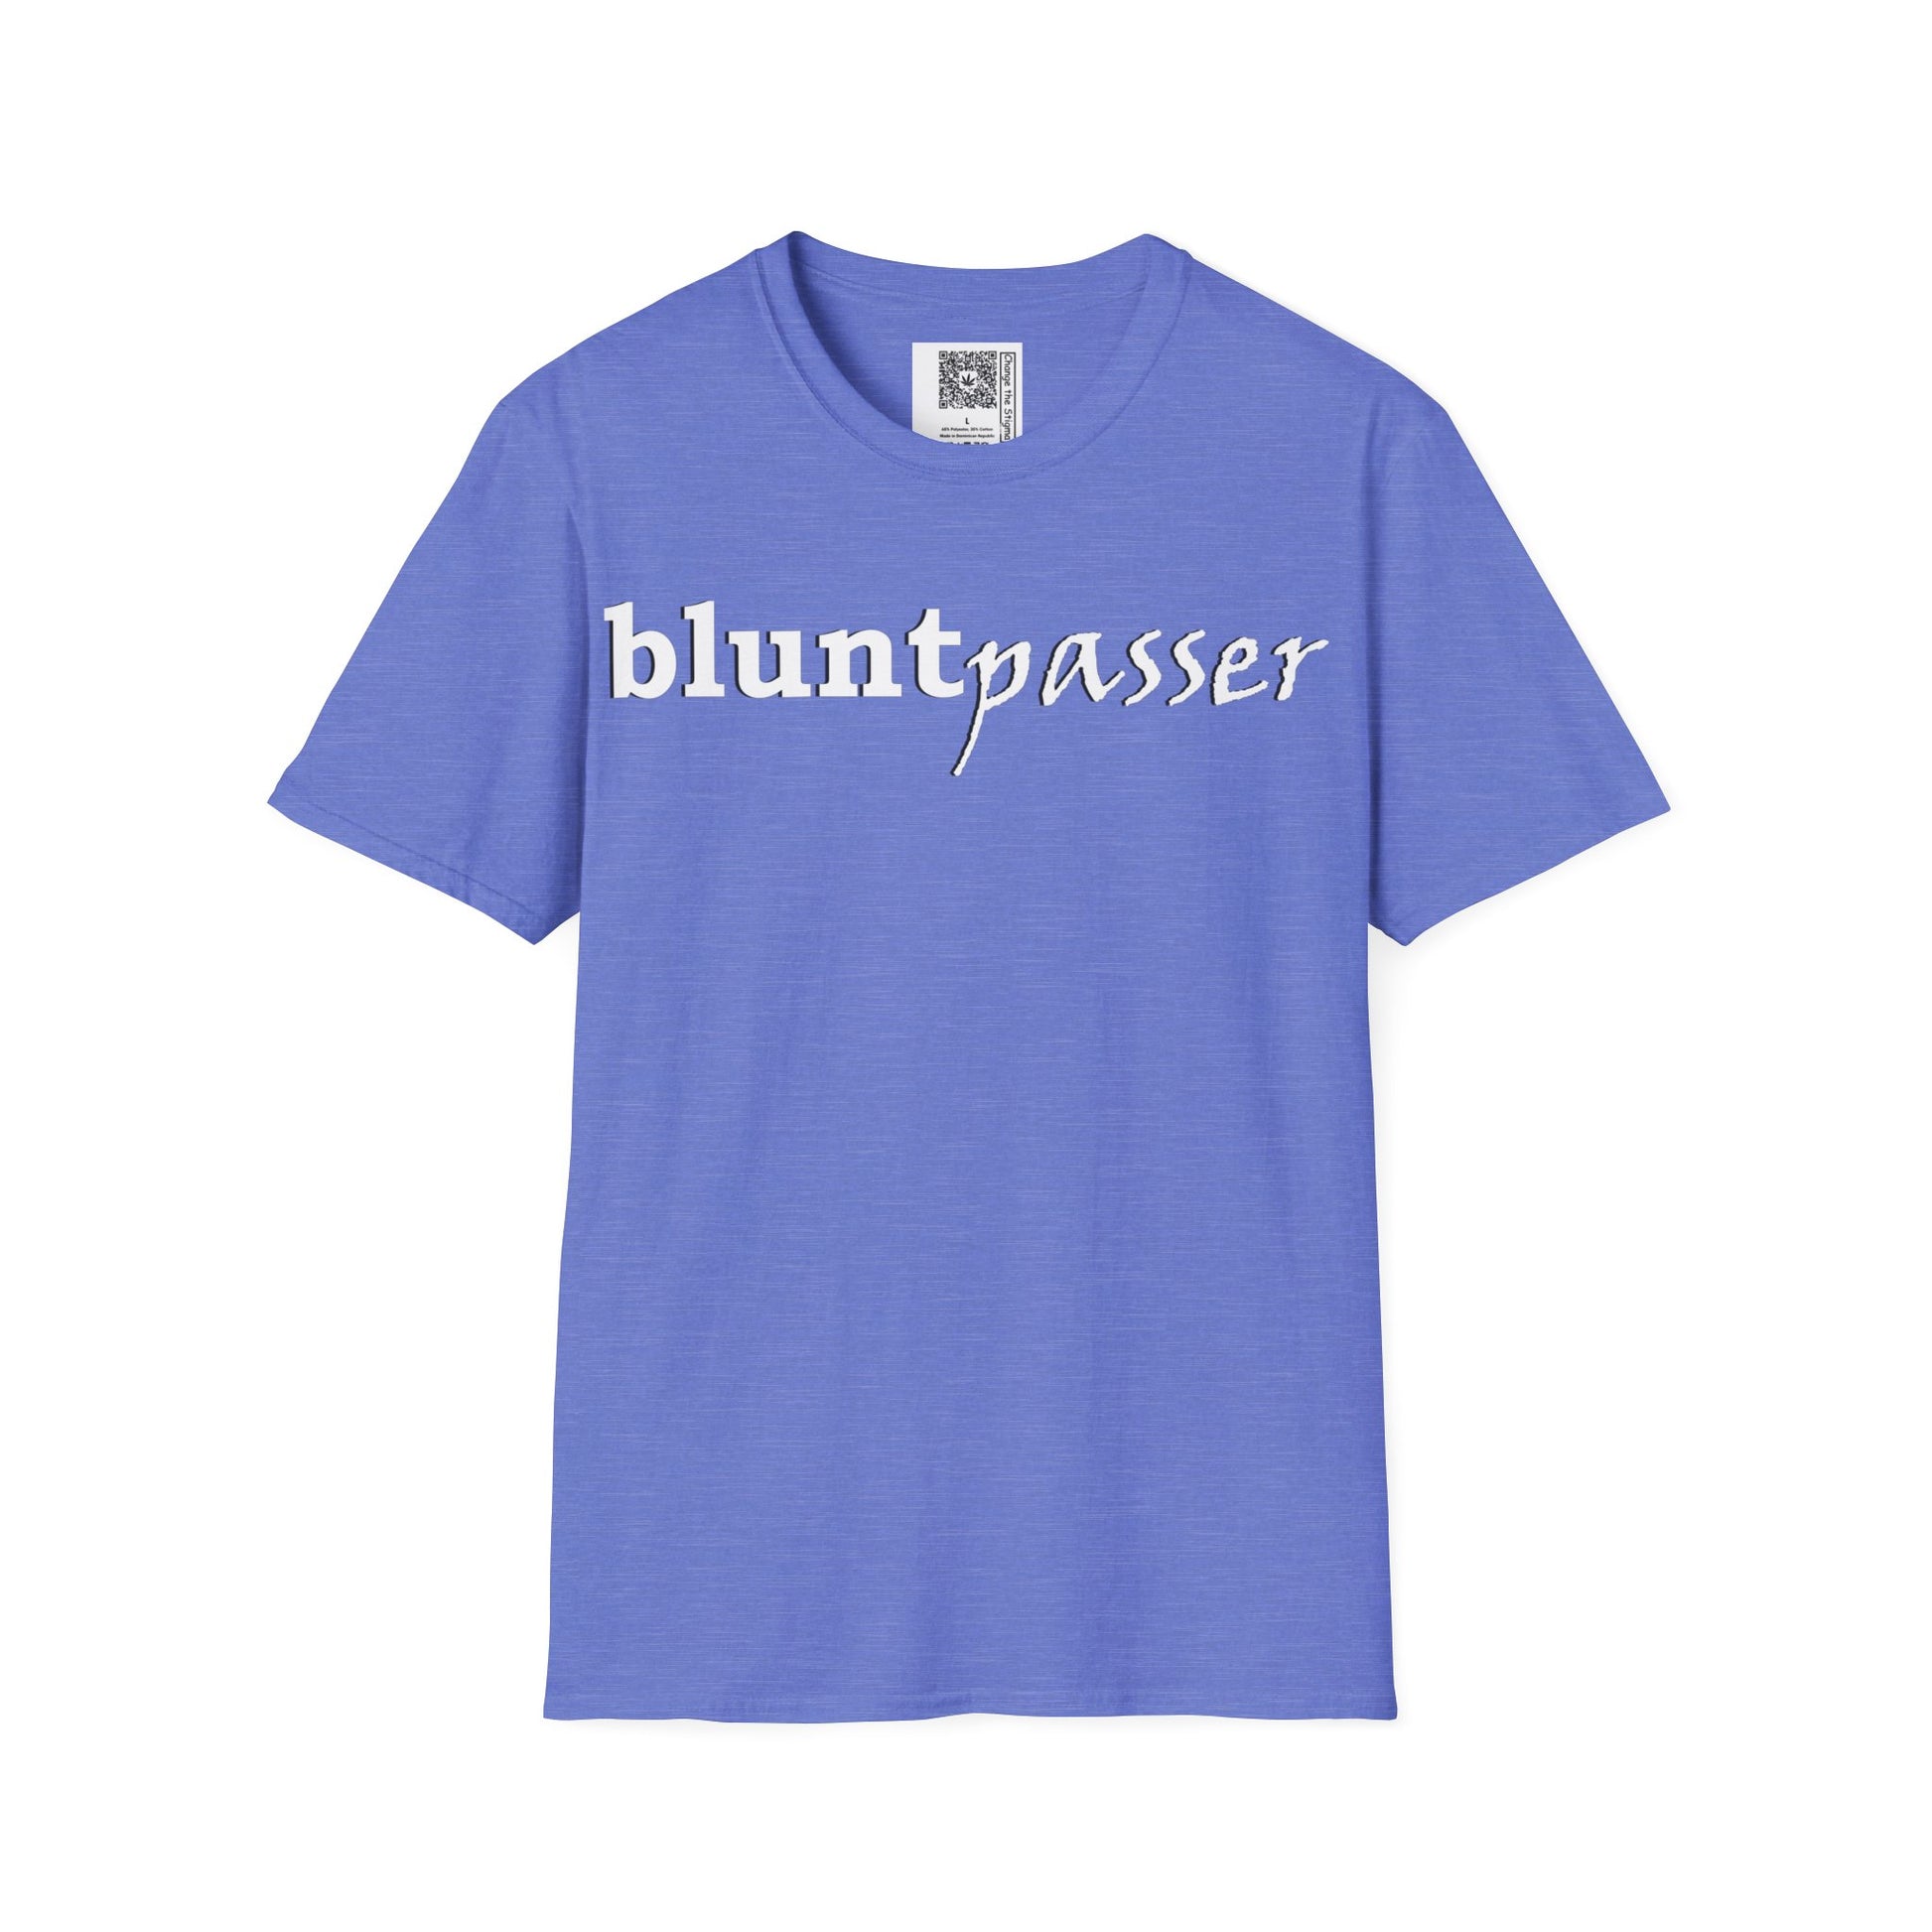 Change the Stigma, Heather Royal color, shirt saying "blunt passer", Shirt is open displayed, Qr code is shown neck tag